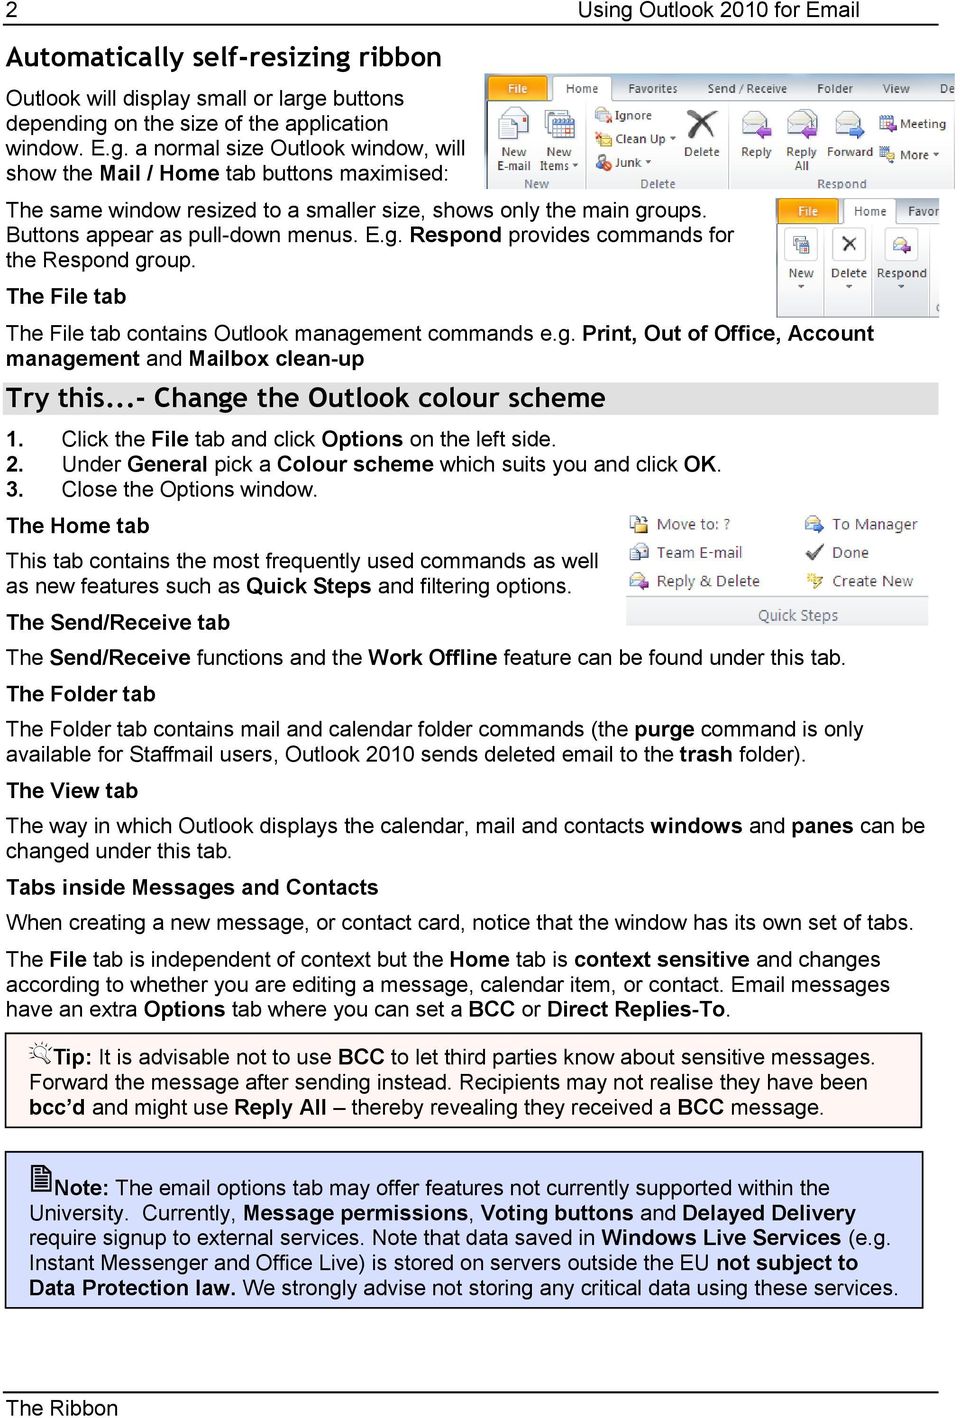 ..- Change the Outlook colour scheme 1. Click the File tab and click Options on the left side. 2. Under General pick a Colour scheme which suits you and click OK. 3. Close the Options window.